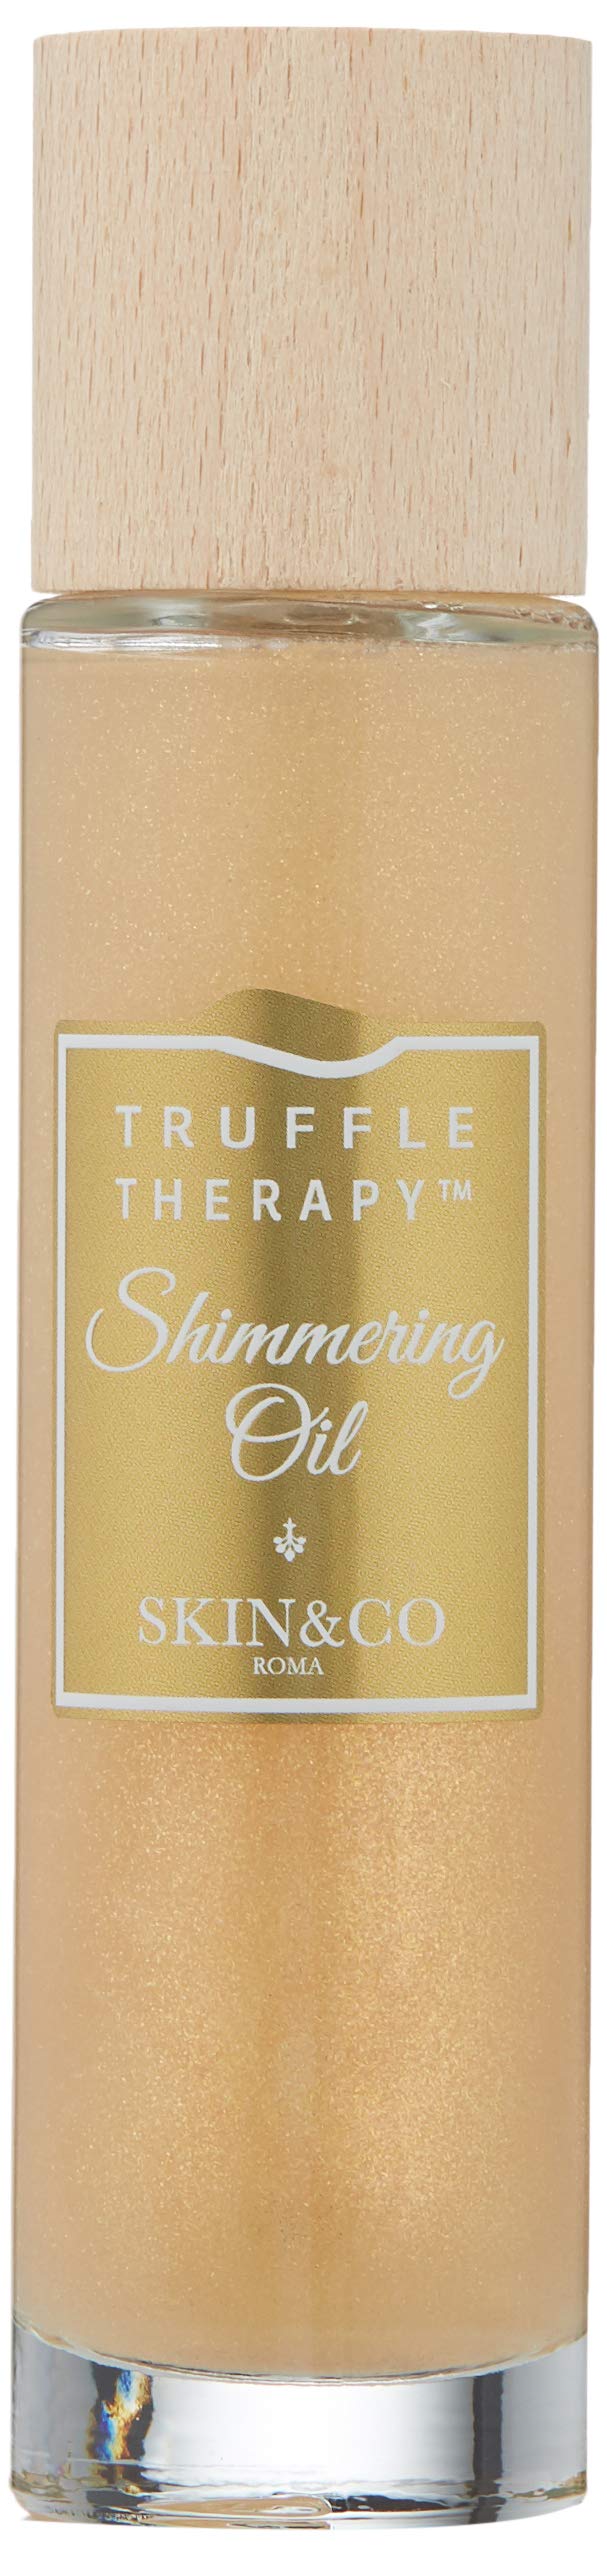 SKIN&CO Rom Truffle Therapy Shimmering Oil, 3.4 fl. oz